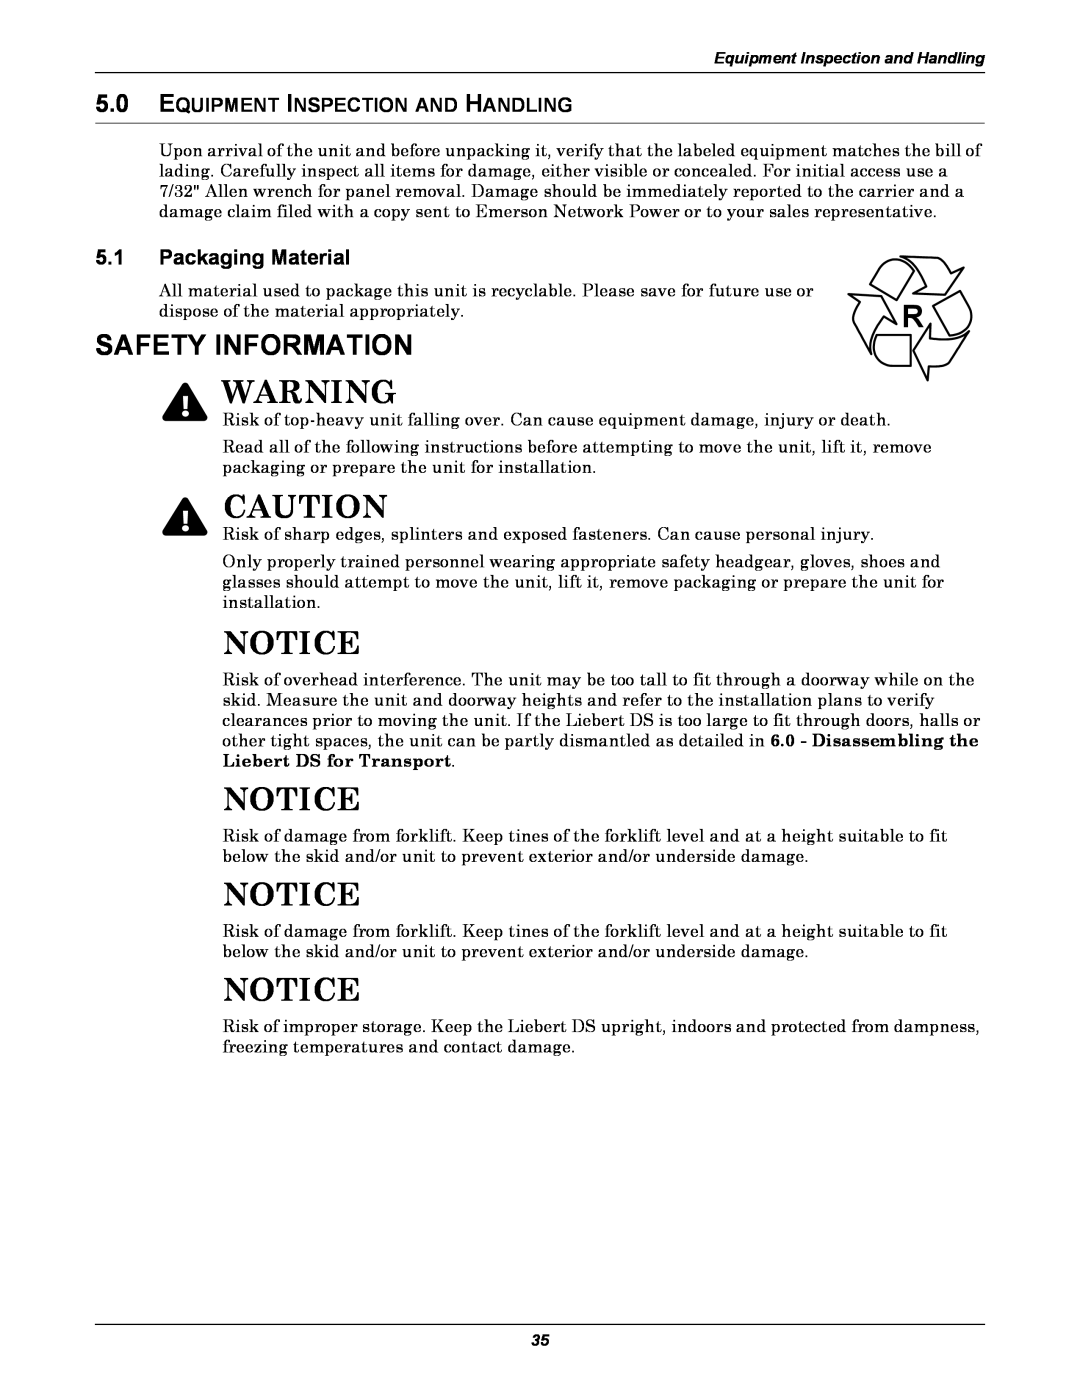 Liebert DS user manual Safety Information, Packaging Material, Equipment Inspection And Handling 